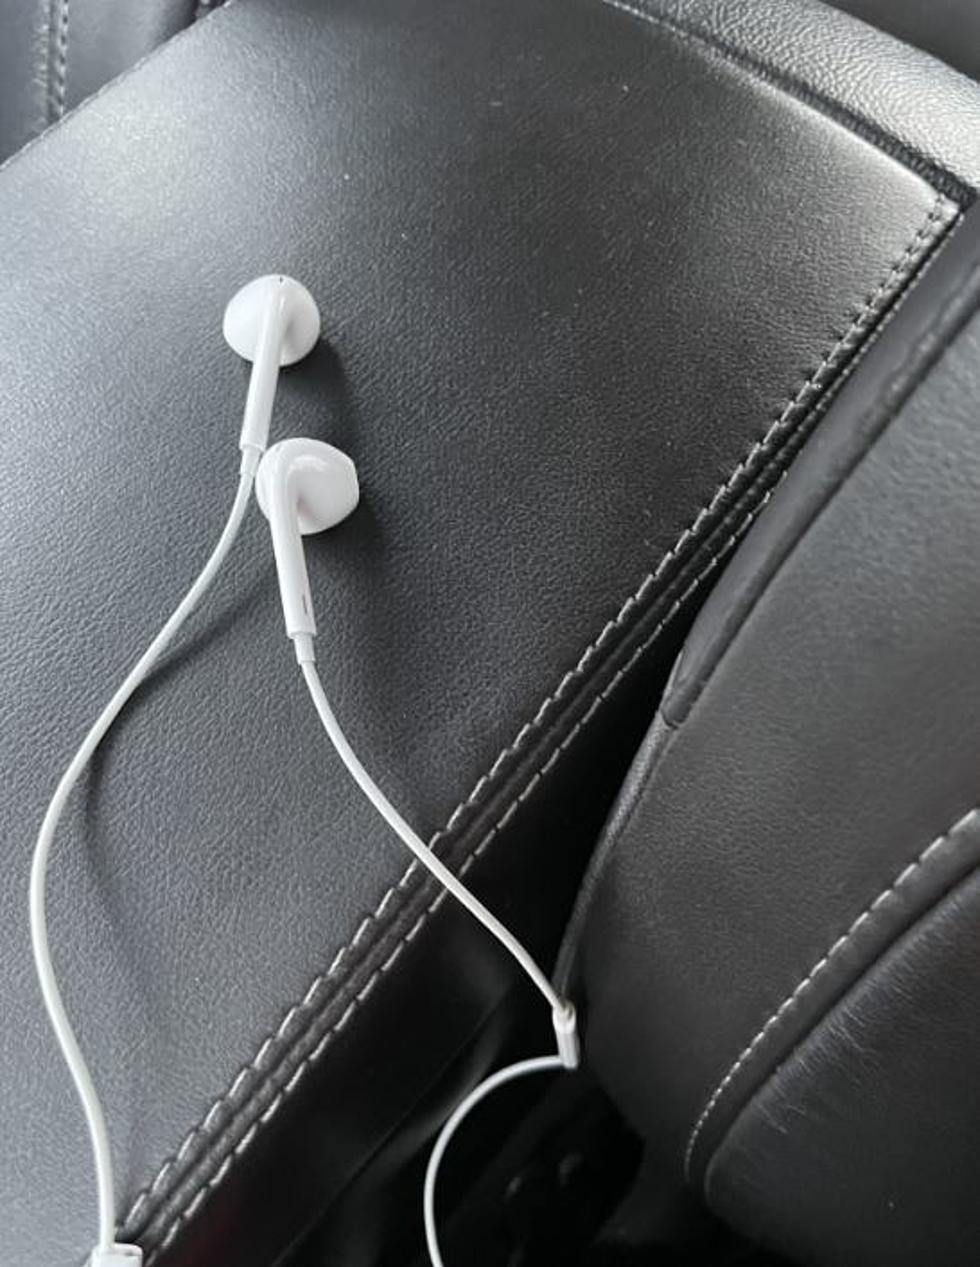 Is it Illegal to Wear Headphones While Driving in New York?